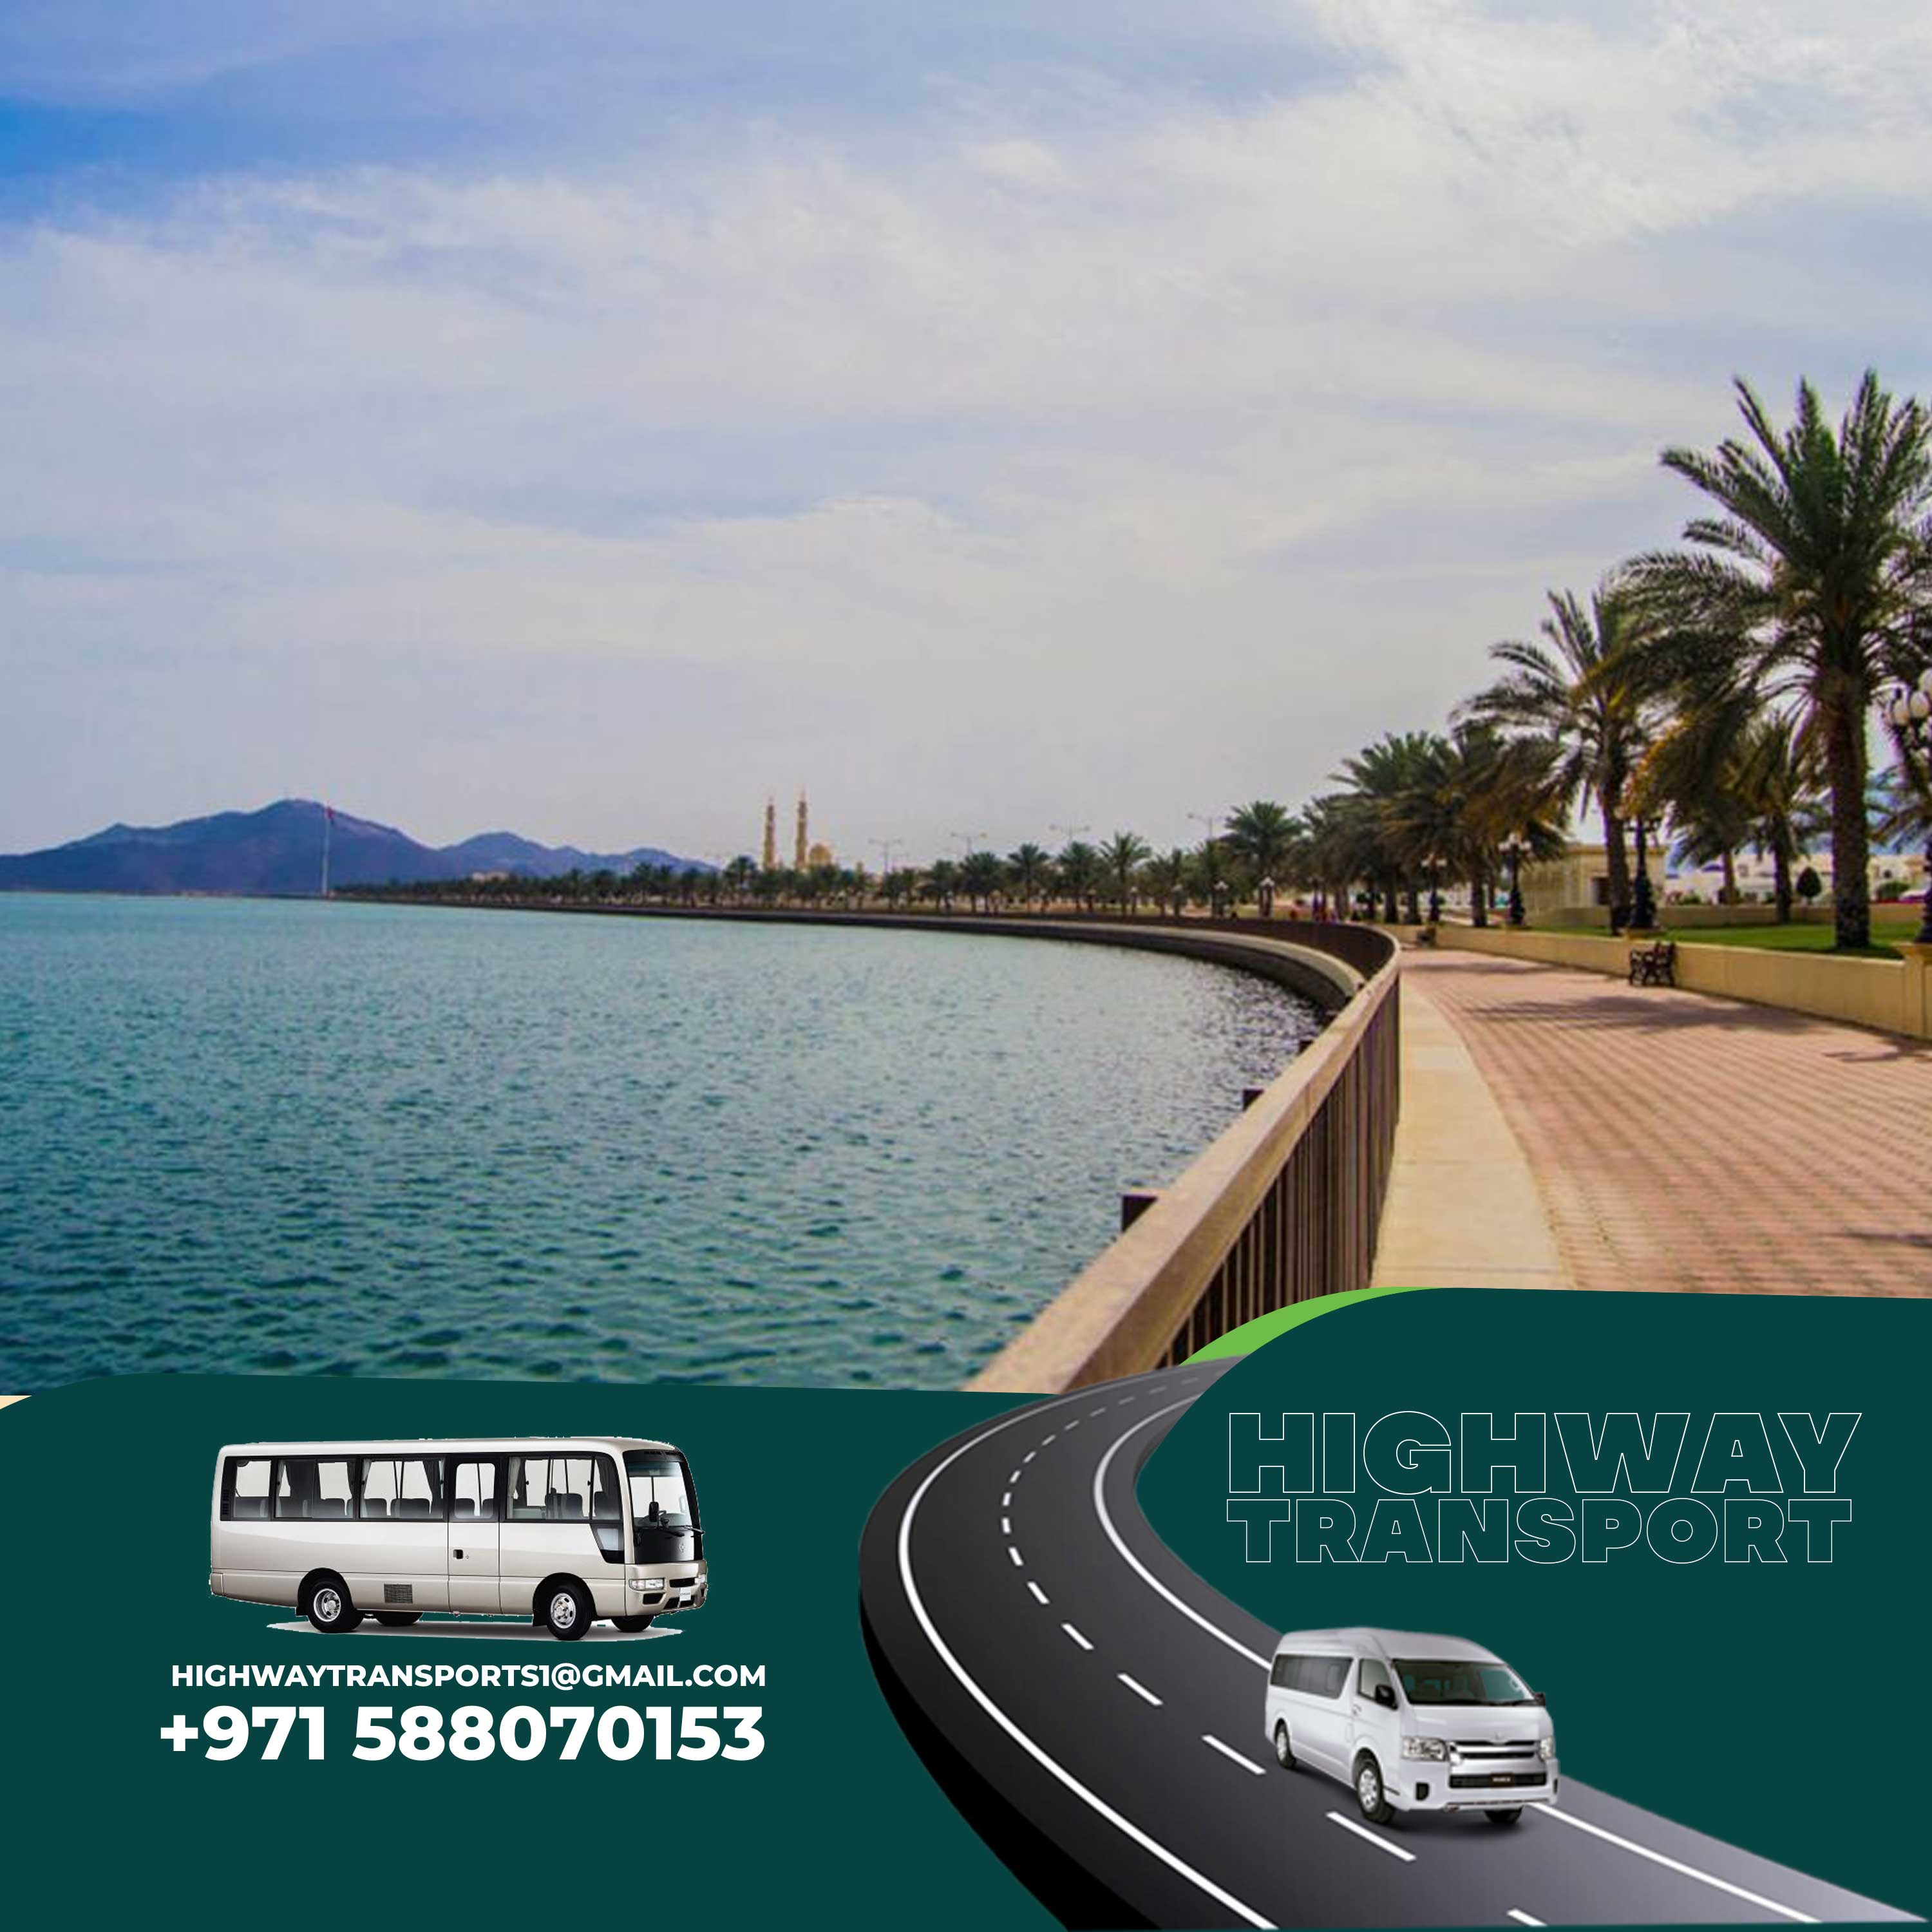 Kalba Corniche Park overlooking the waterfront with lush greenery and seaside views